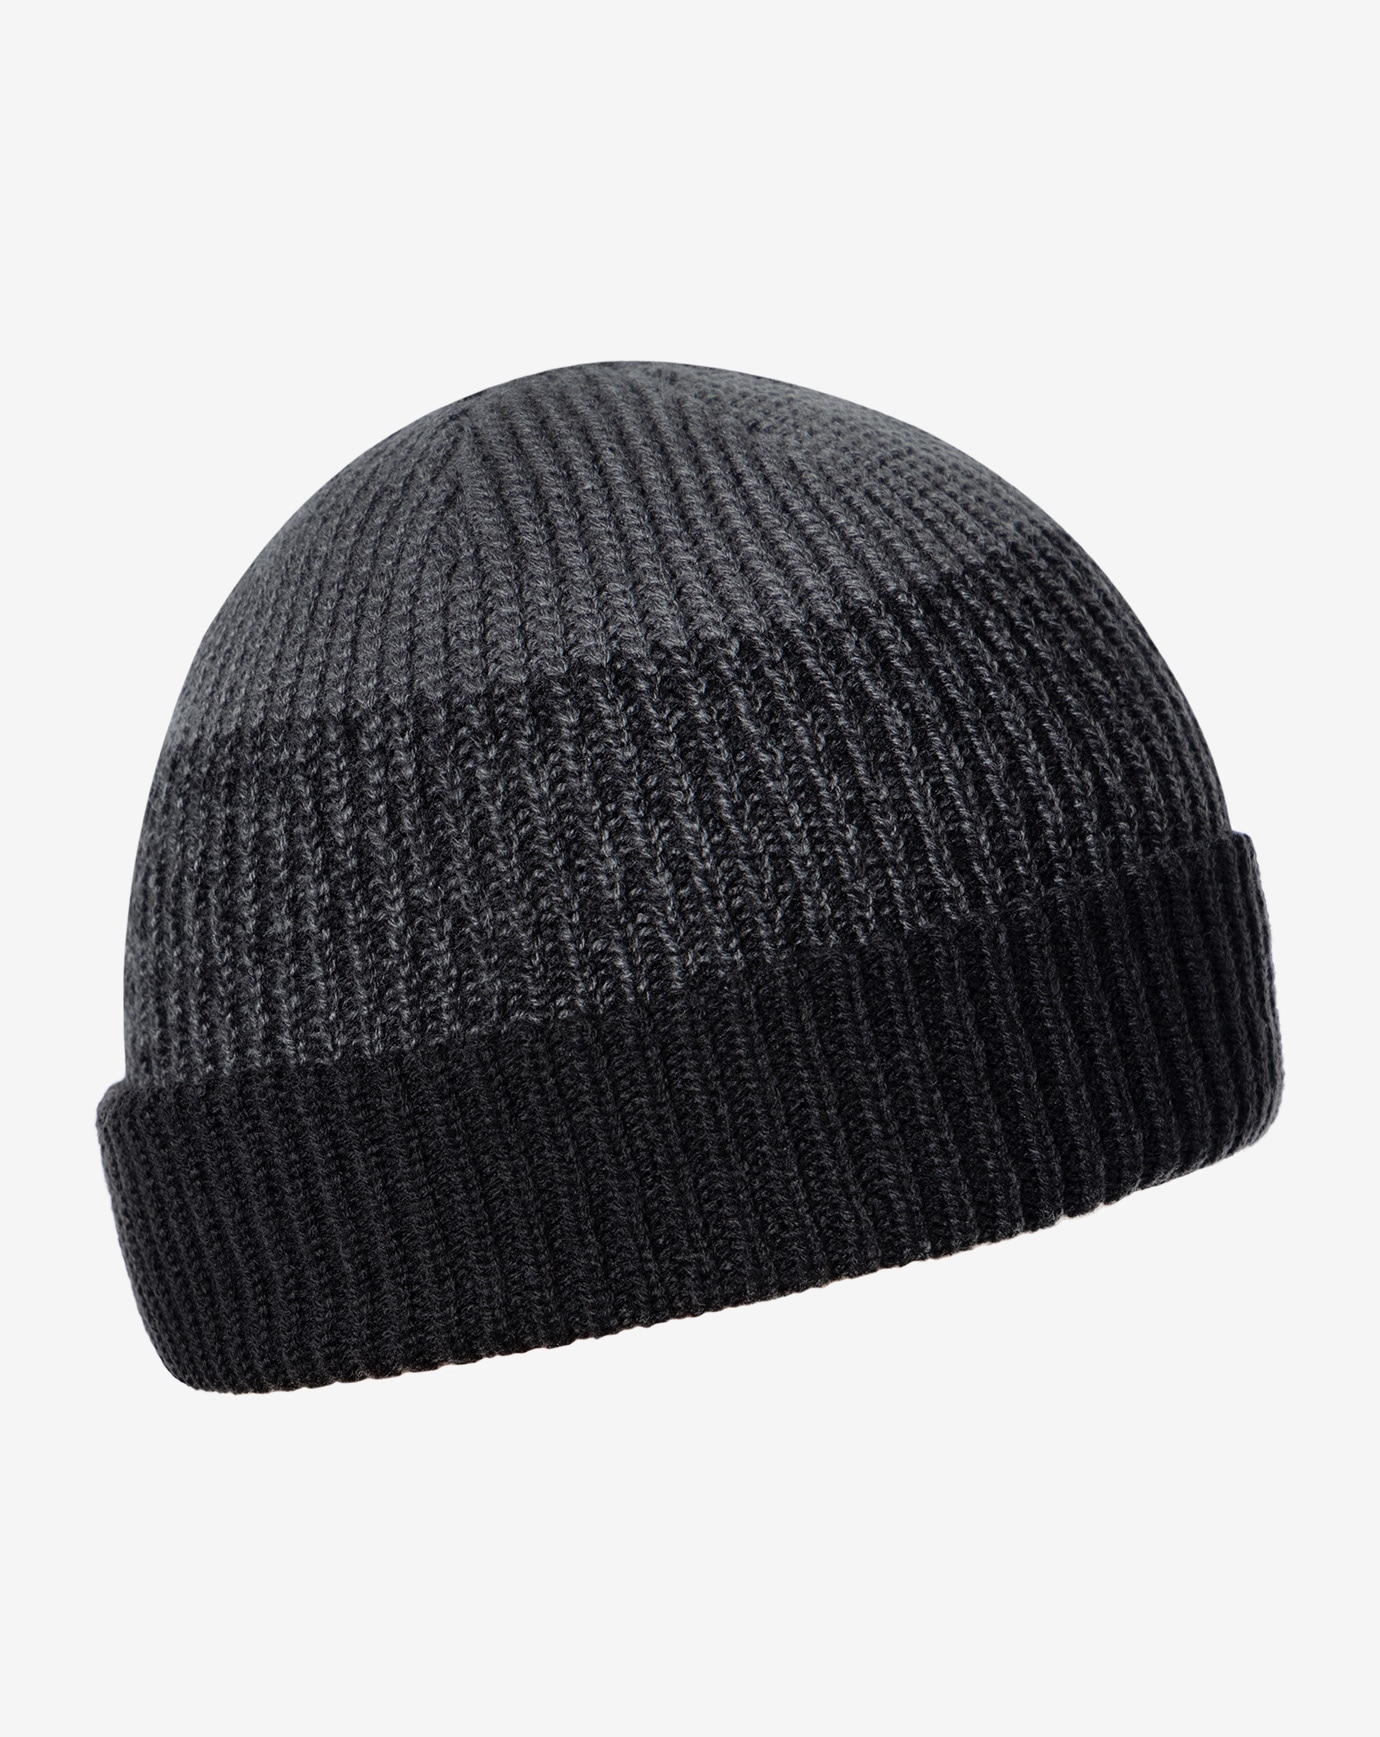 PREVAILING WINDS BEANIE Image Thumbnail 3